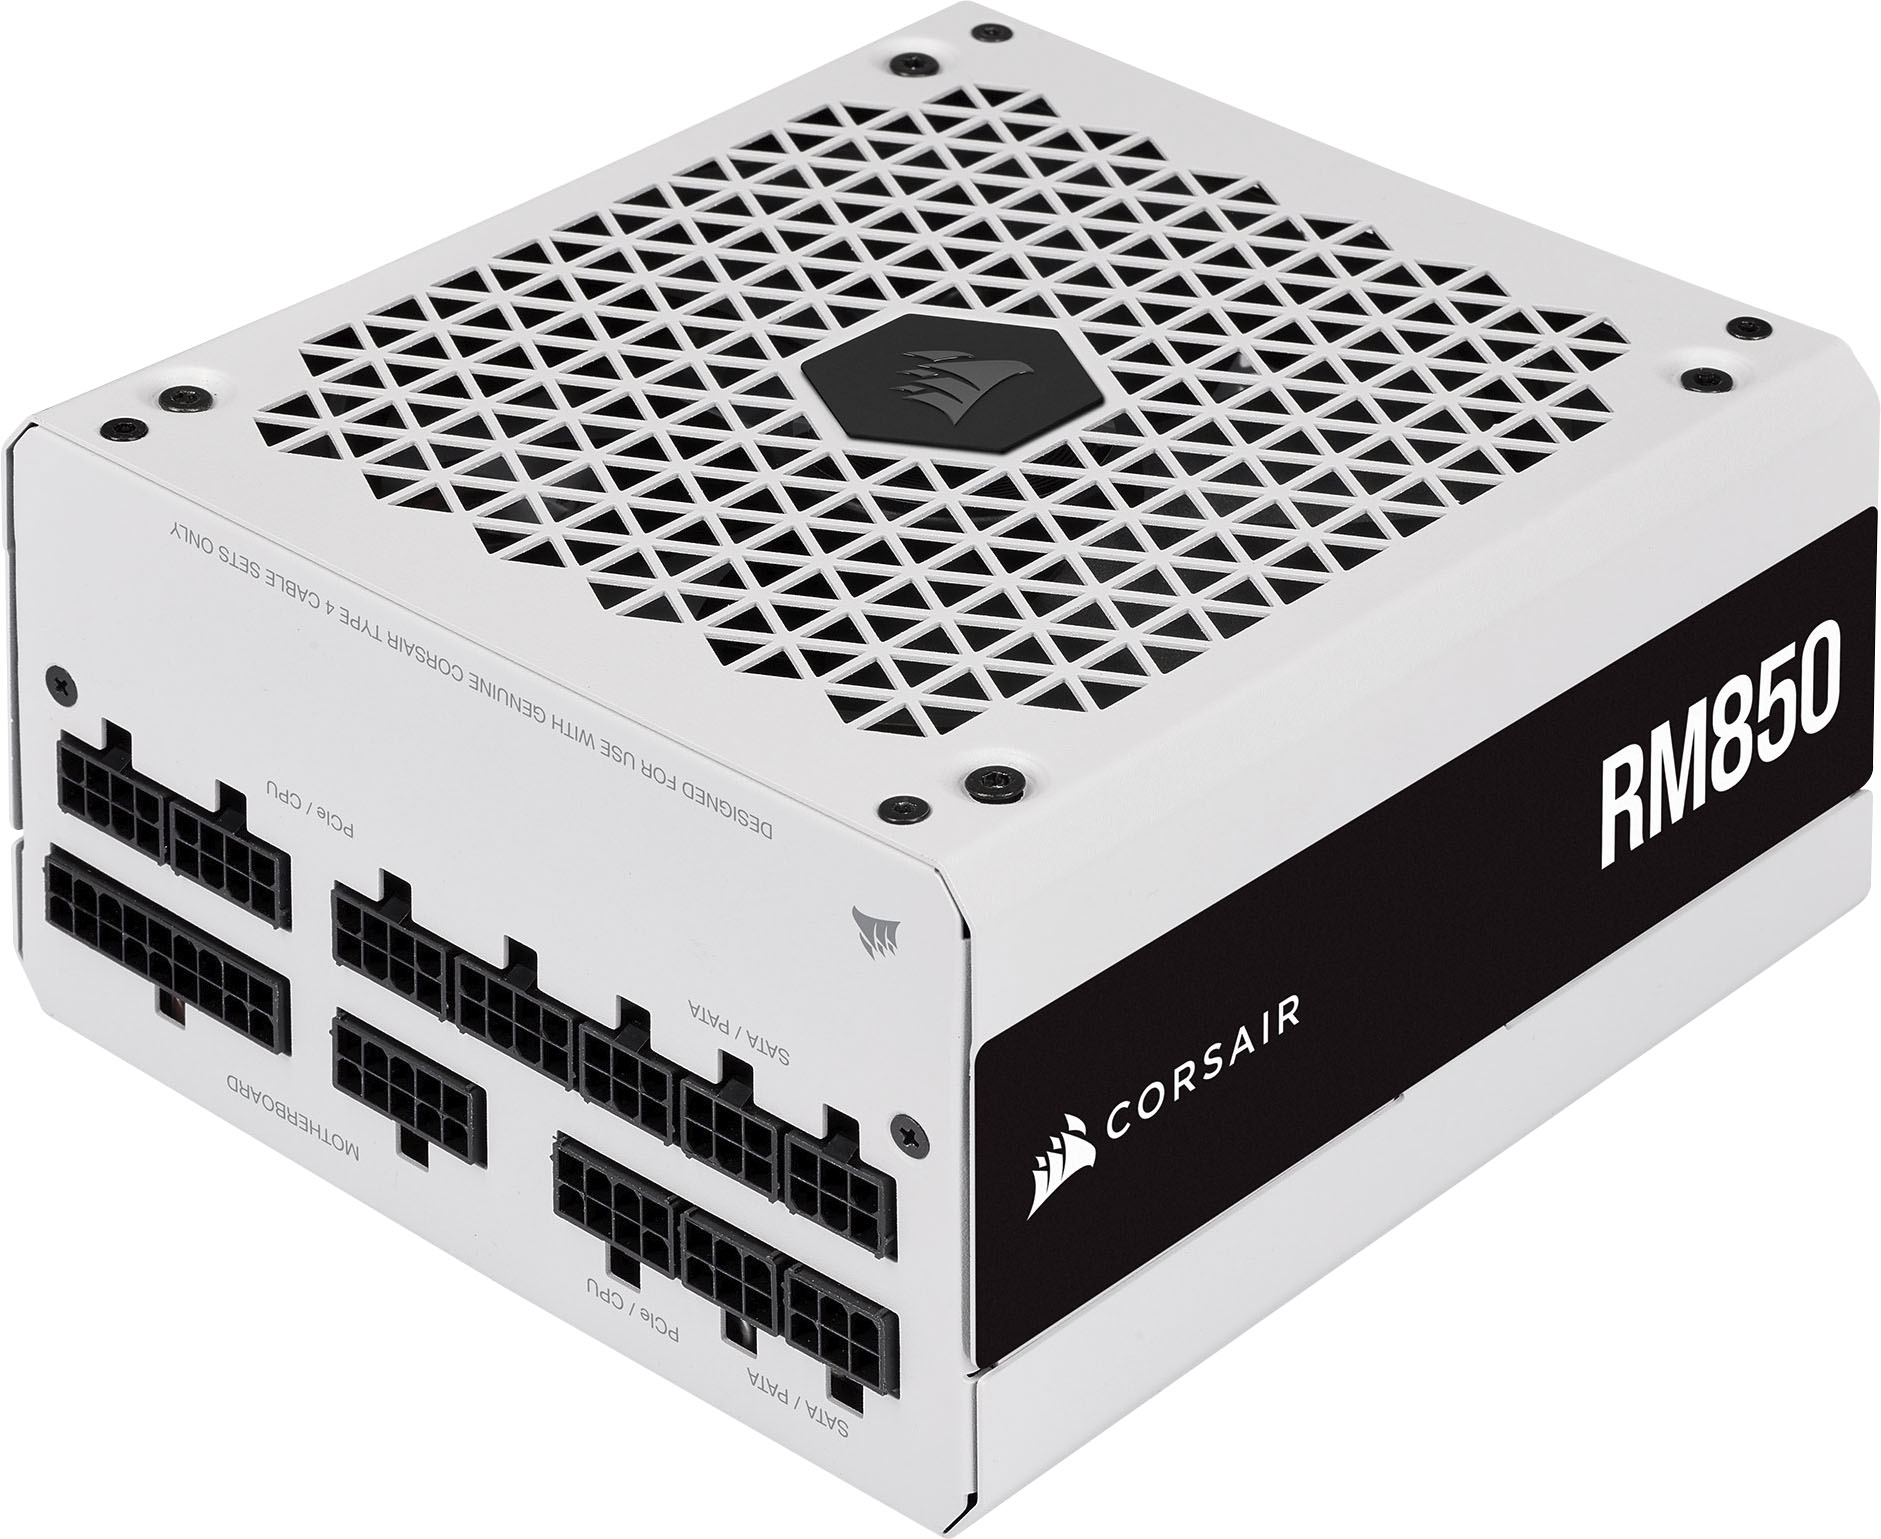 Hjemland pop Bandit CORSAIR RM Series RM850 850W ATX 80 PLUS GOLD Certified Fully Modular Power  Supply White CP-9020232-NA - Best Buy